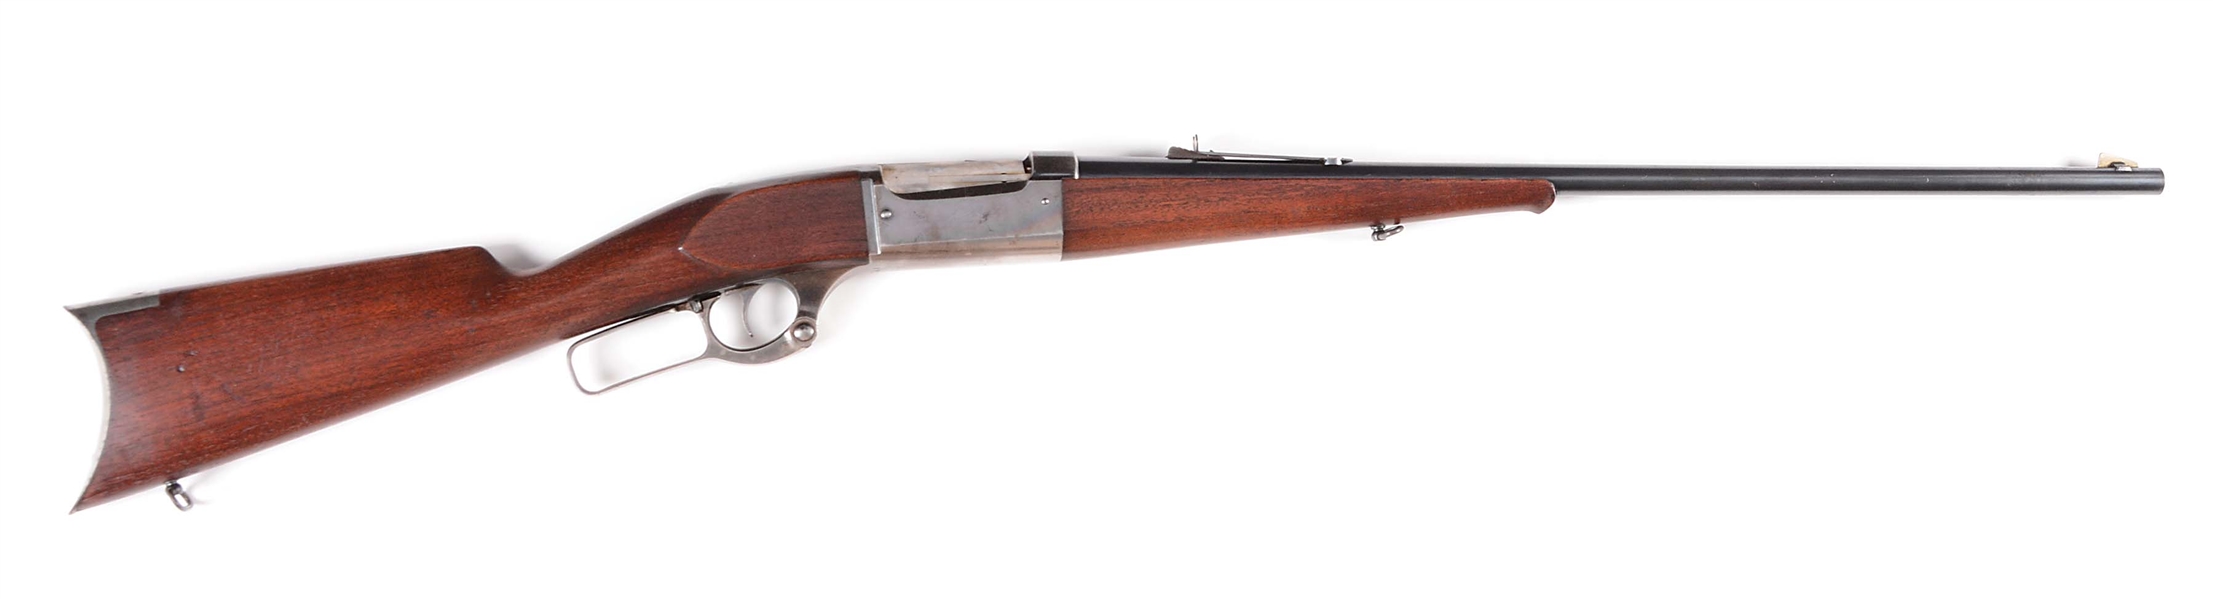 (C) FINE & SCARCE EXTREMELY EARLY SAVAGE MODEL 1899 LEVER ACTION RIFLE (1901).